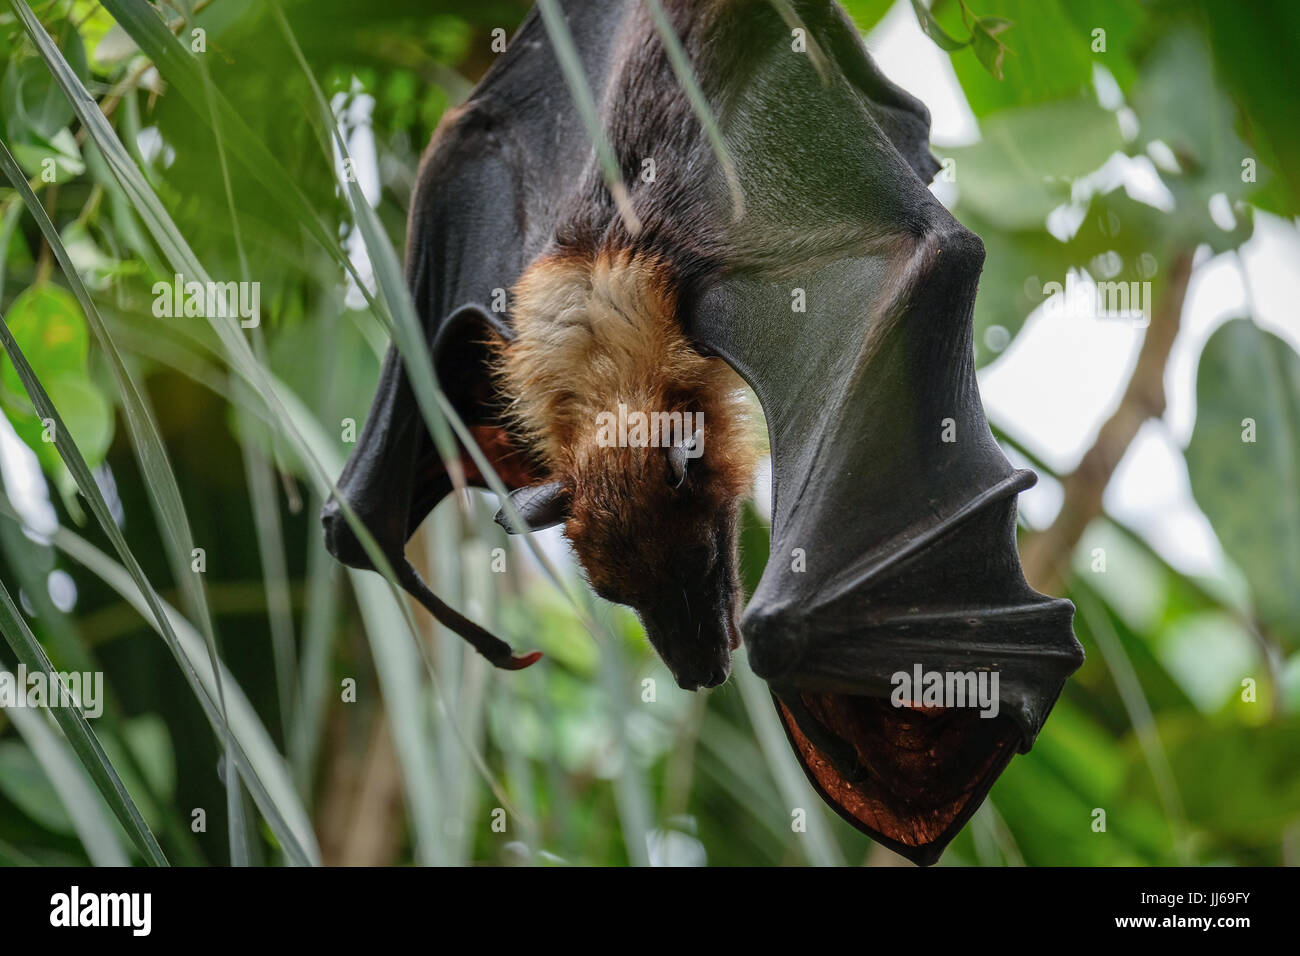 FUENGIROLA, ANDALUCIA/SPAIN - JULY 4 : Flying Fox Bat (Pteropus) at the Bioparc in Fuengirola Costa del Sol Spain on July 4, 2017 Stock Photo